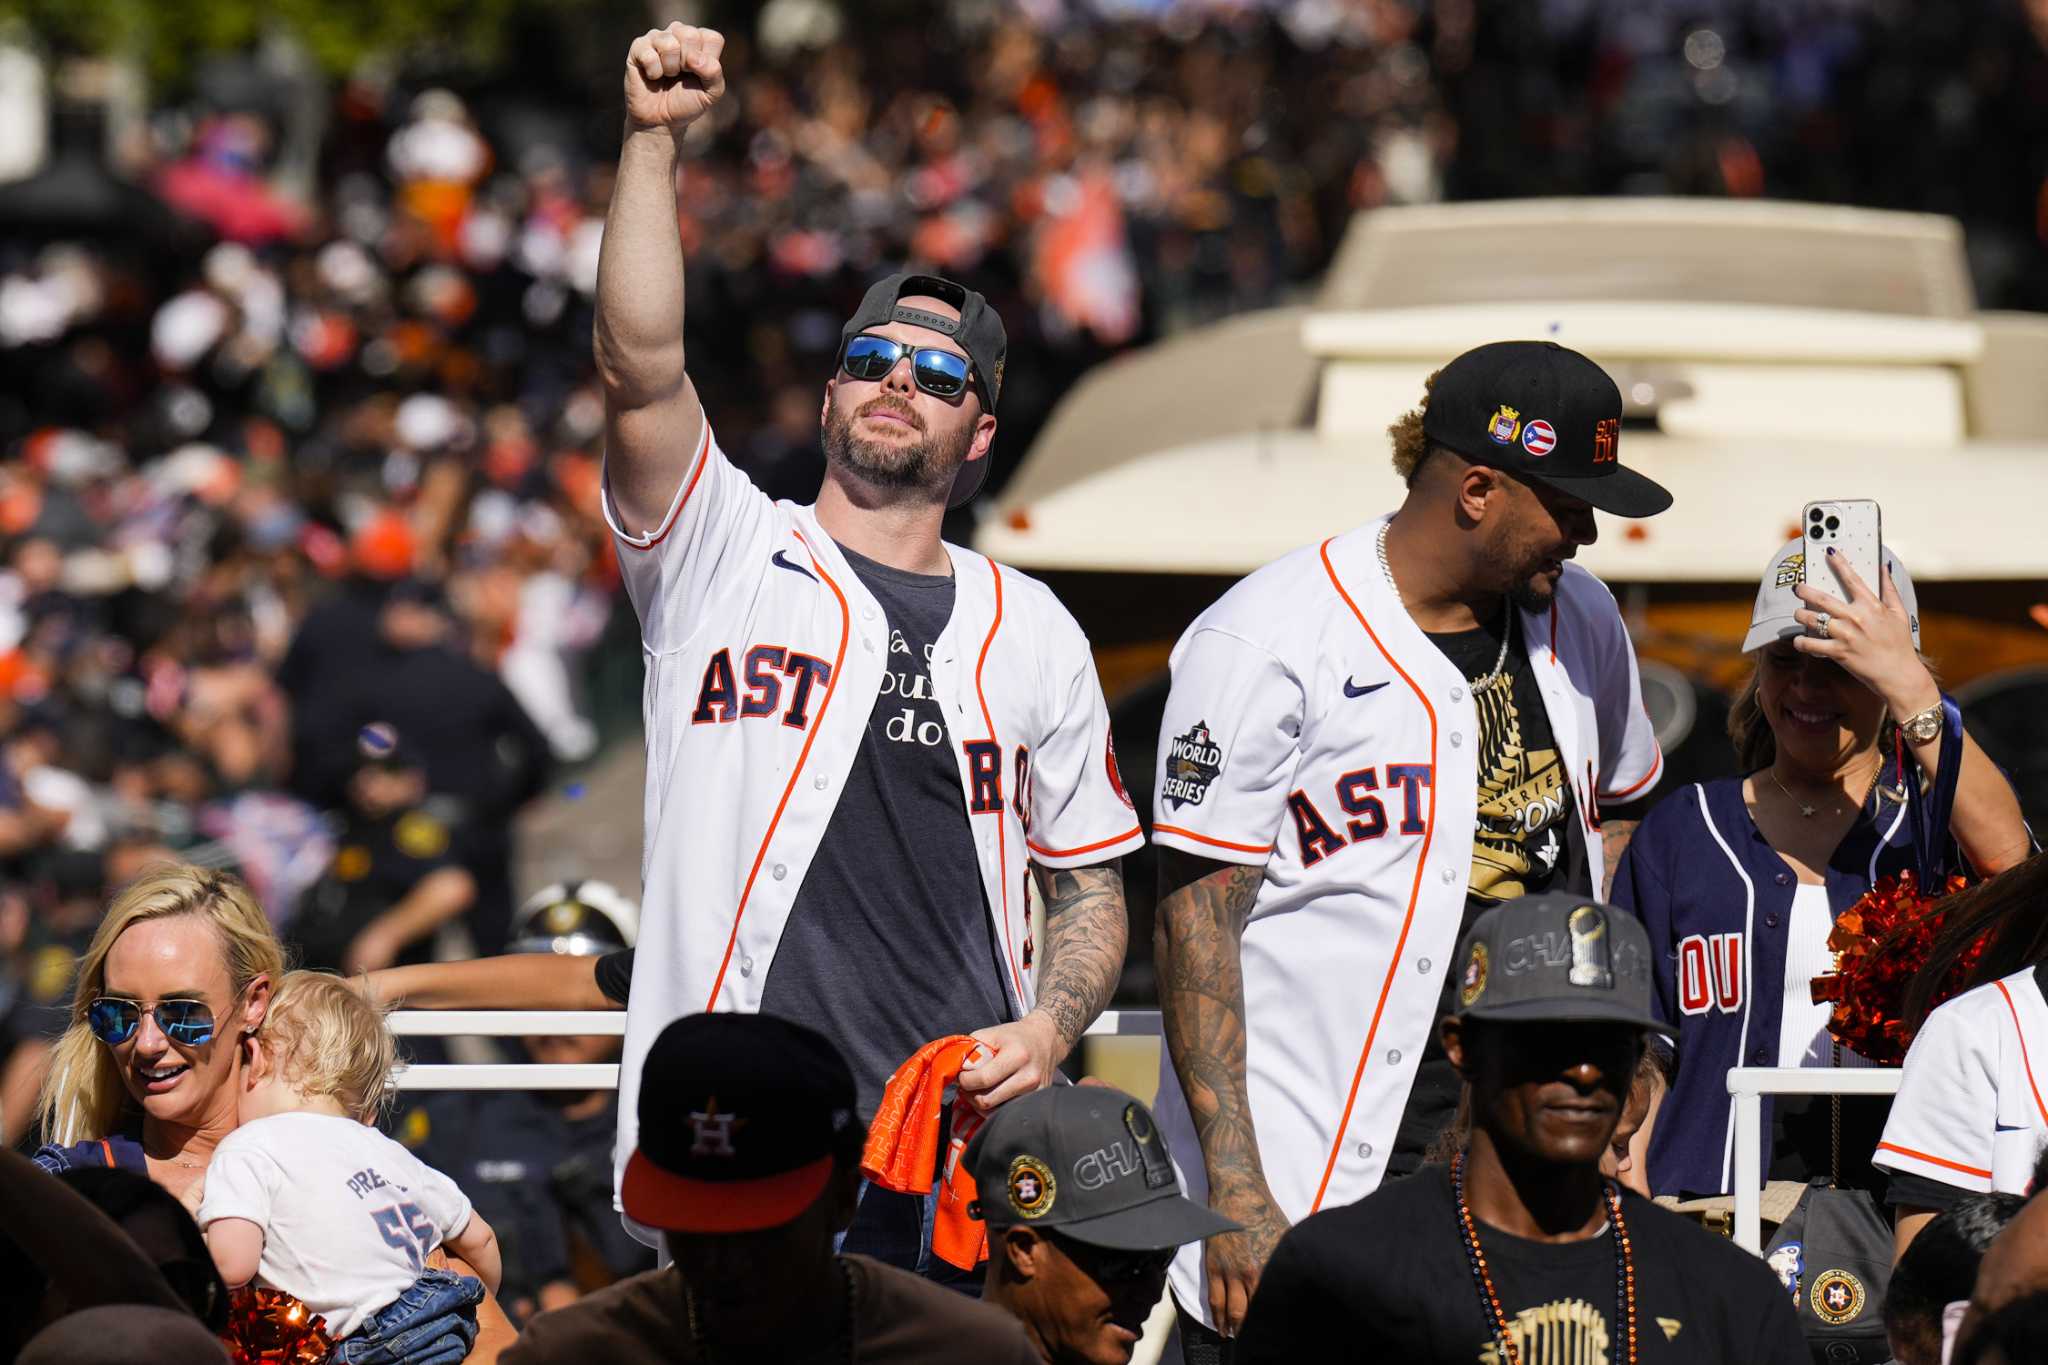 Houston Astros: In H-Town, the Astros have earned dynasty status